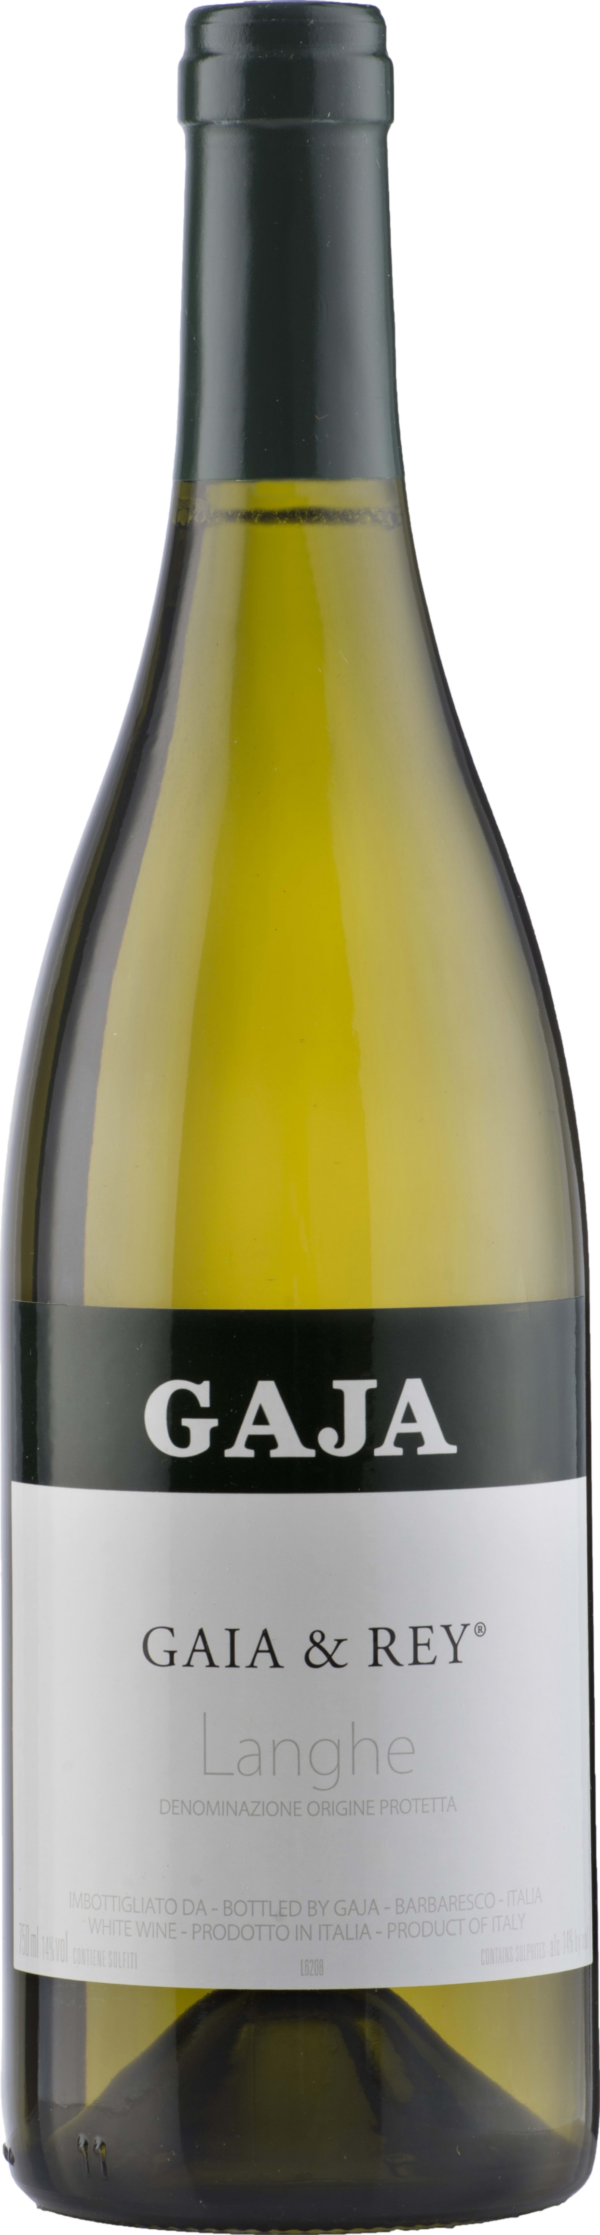 Product image of Gaja Gaia & Rey Chardonnay 2020 from 8wines